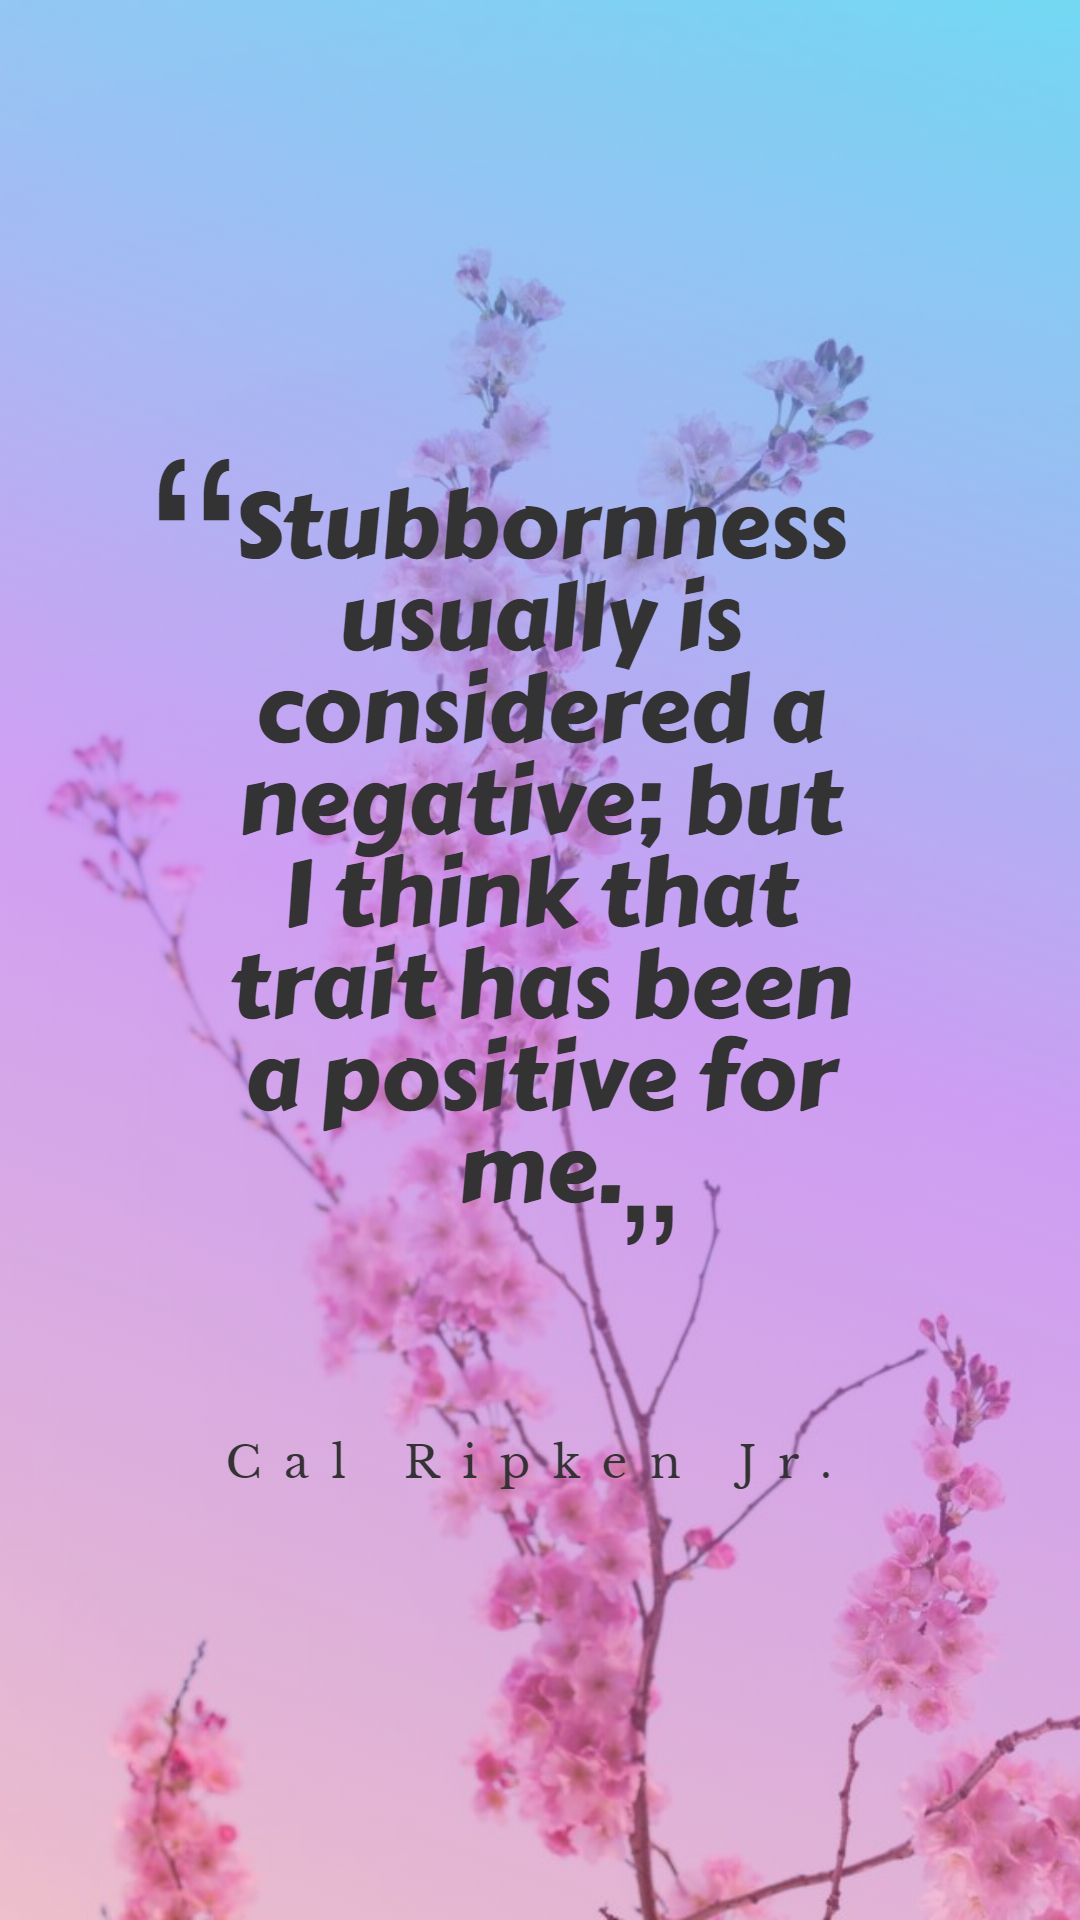 Stubbornness usually is considered a negative but I think that trait has been a positive for me.